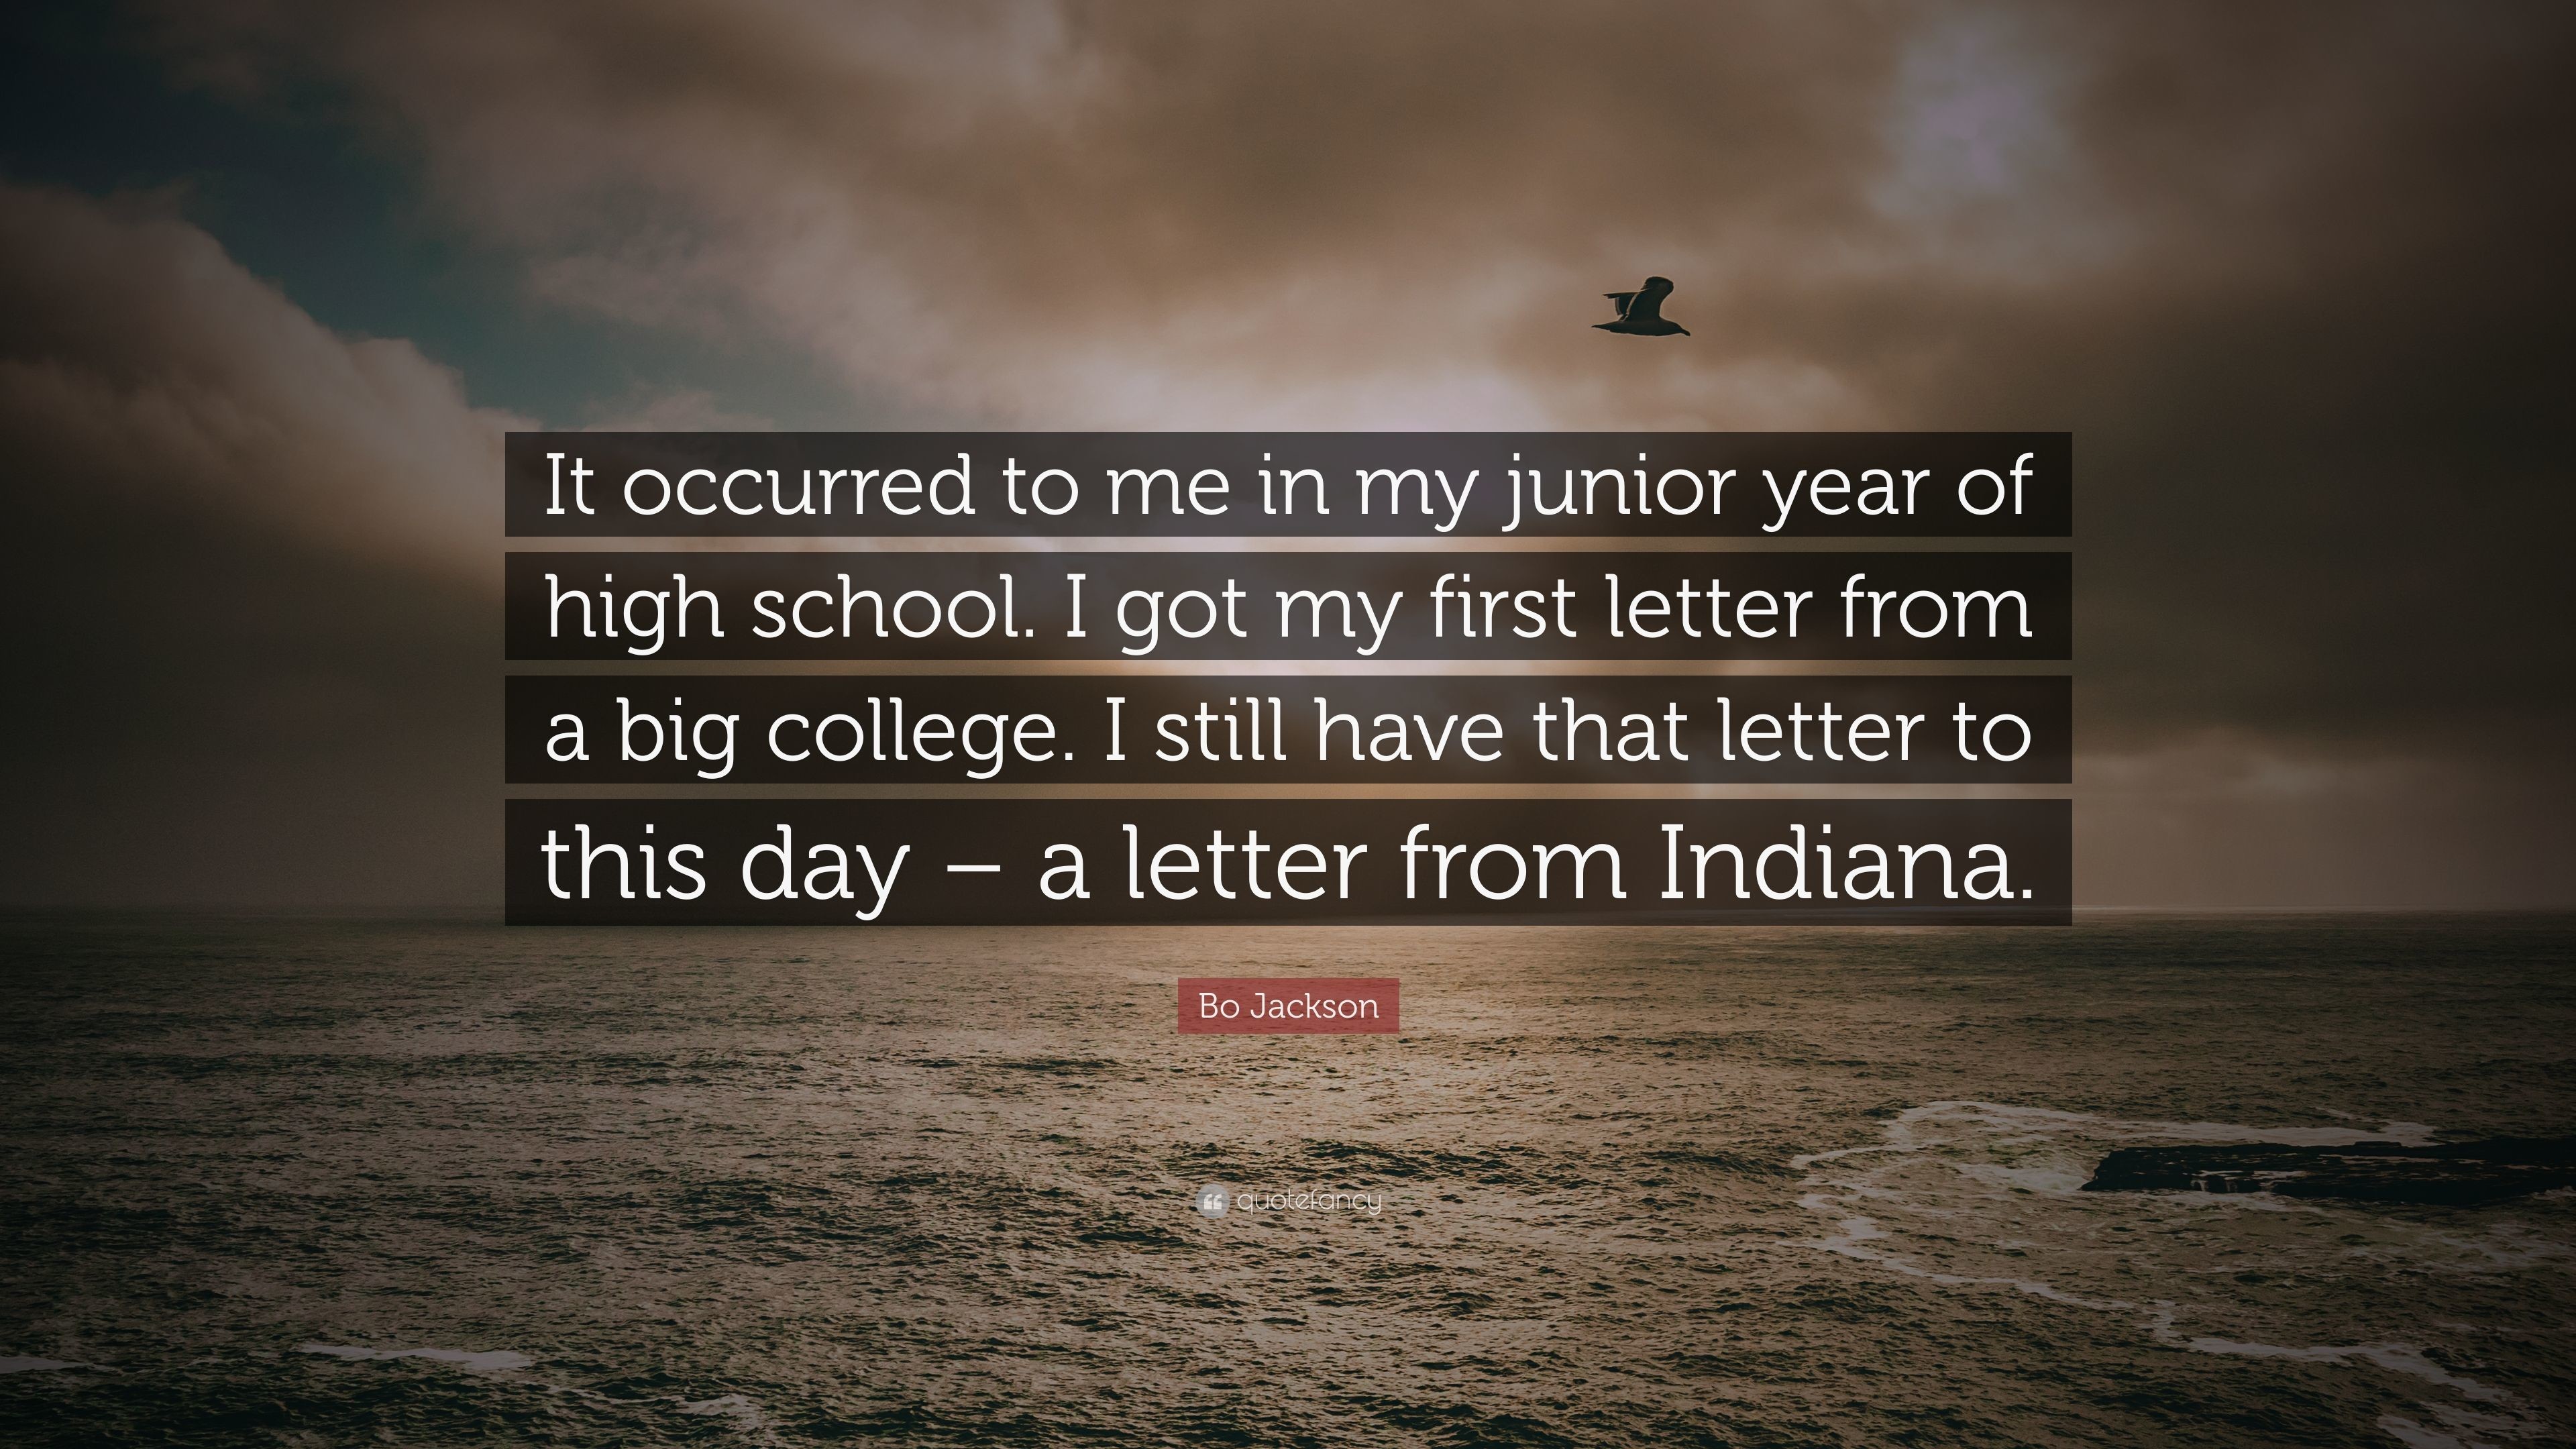 3840x2160 Bo Jackson Quote: “It occurred to me in my junior year of high school